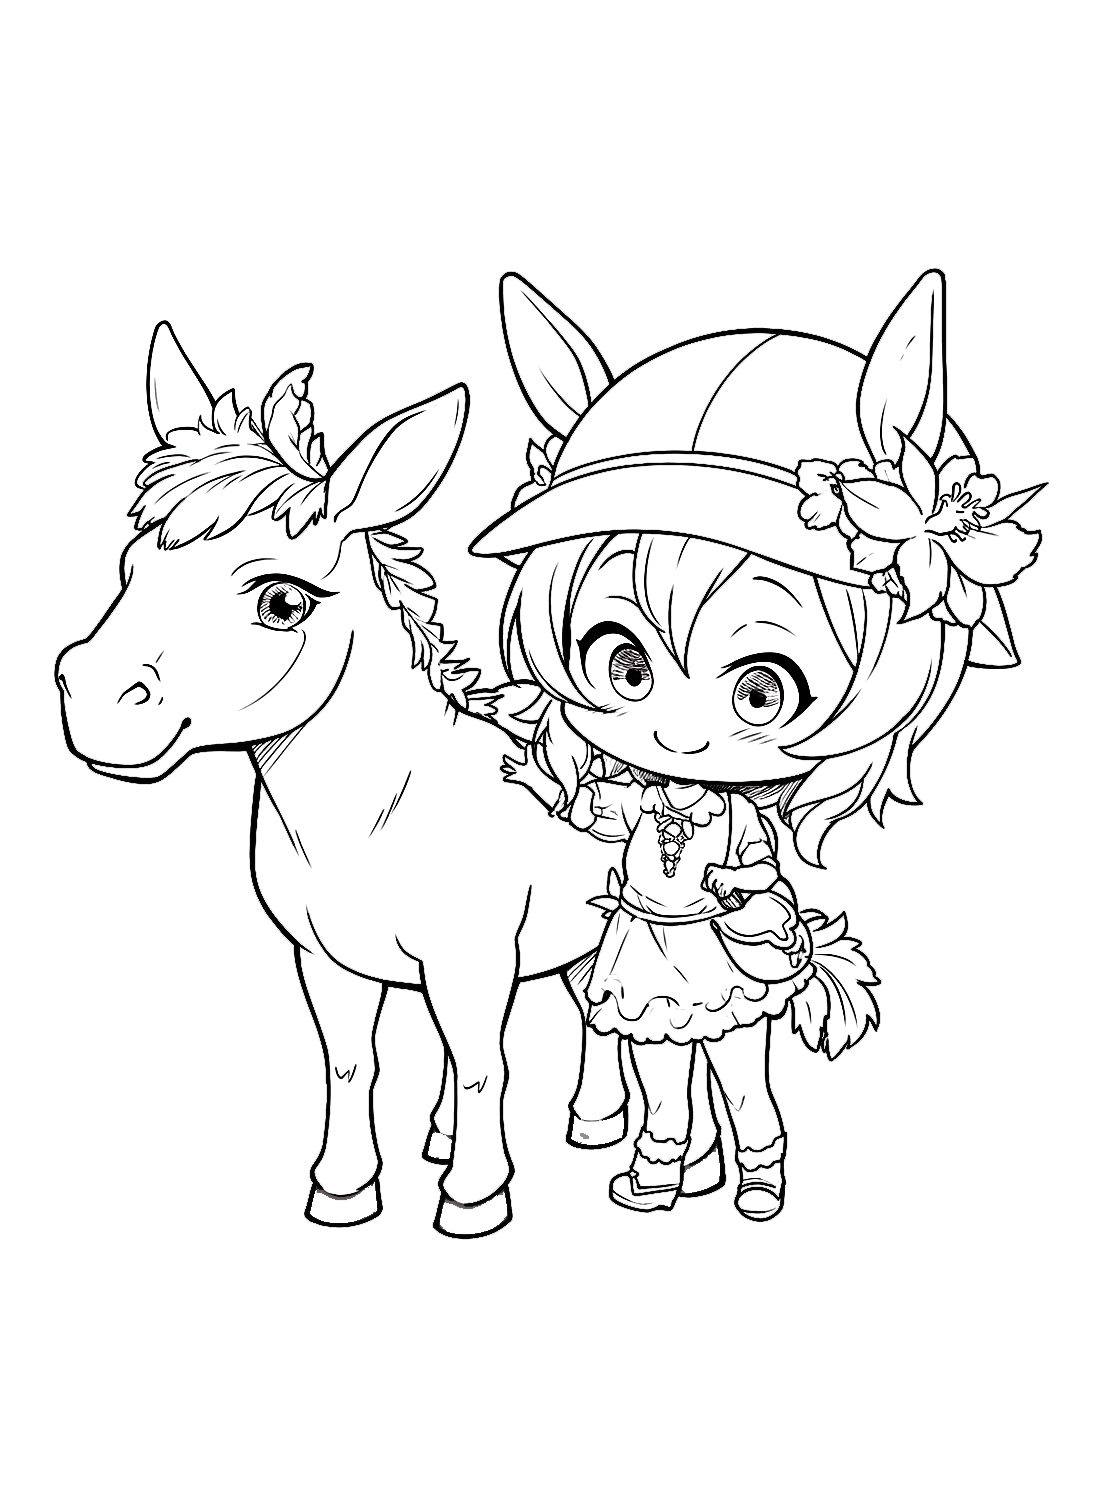 Donkey and a kid Coloring Pages